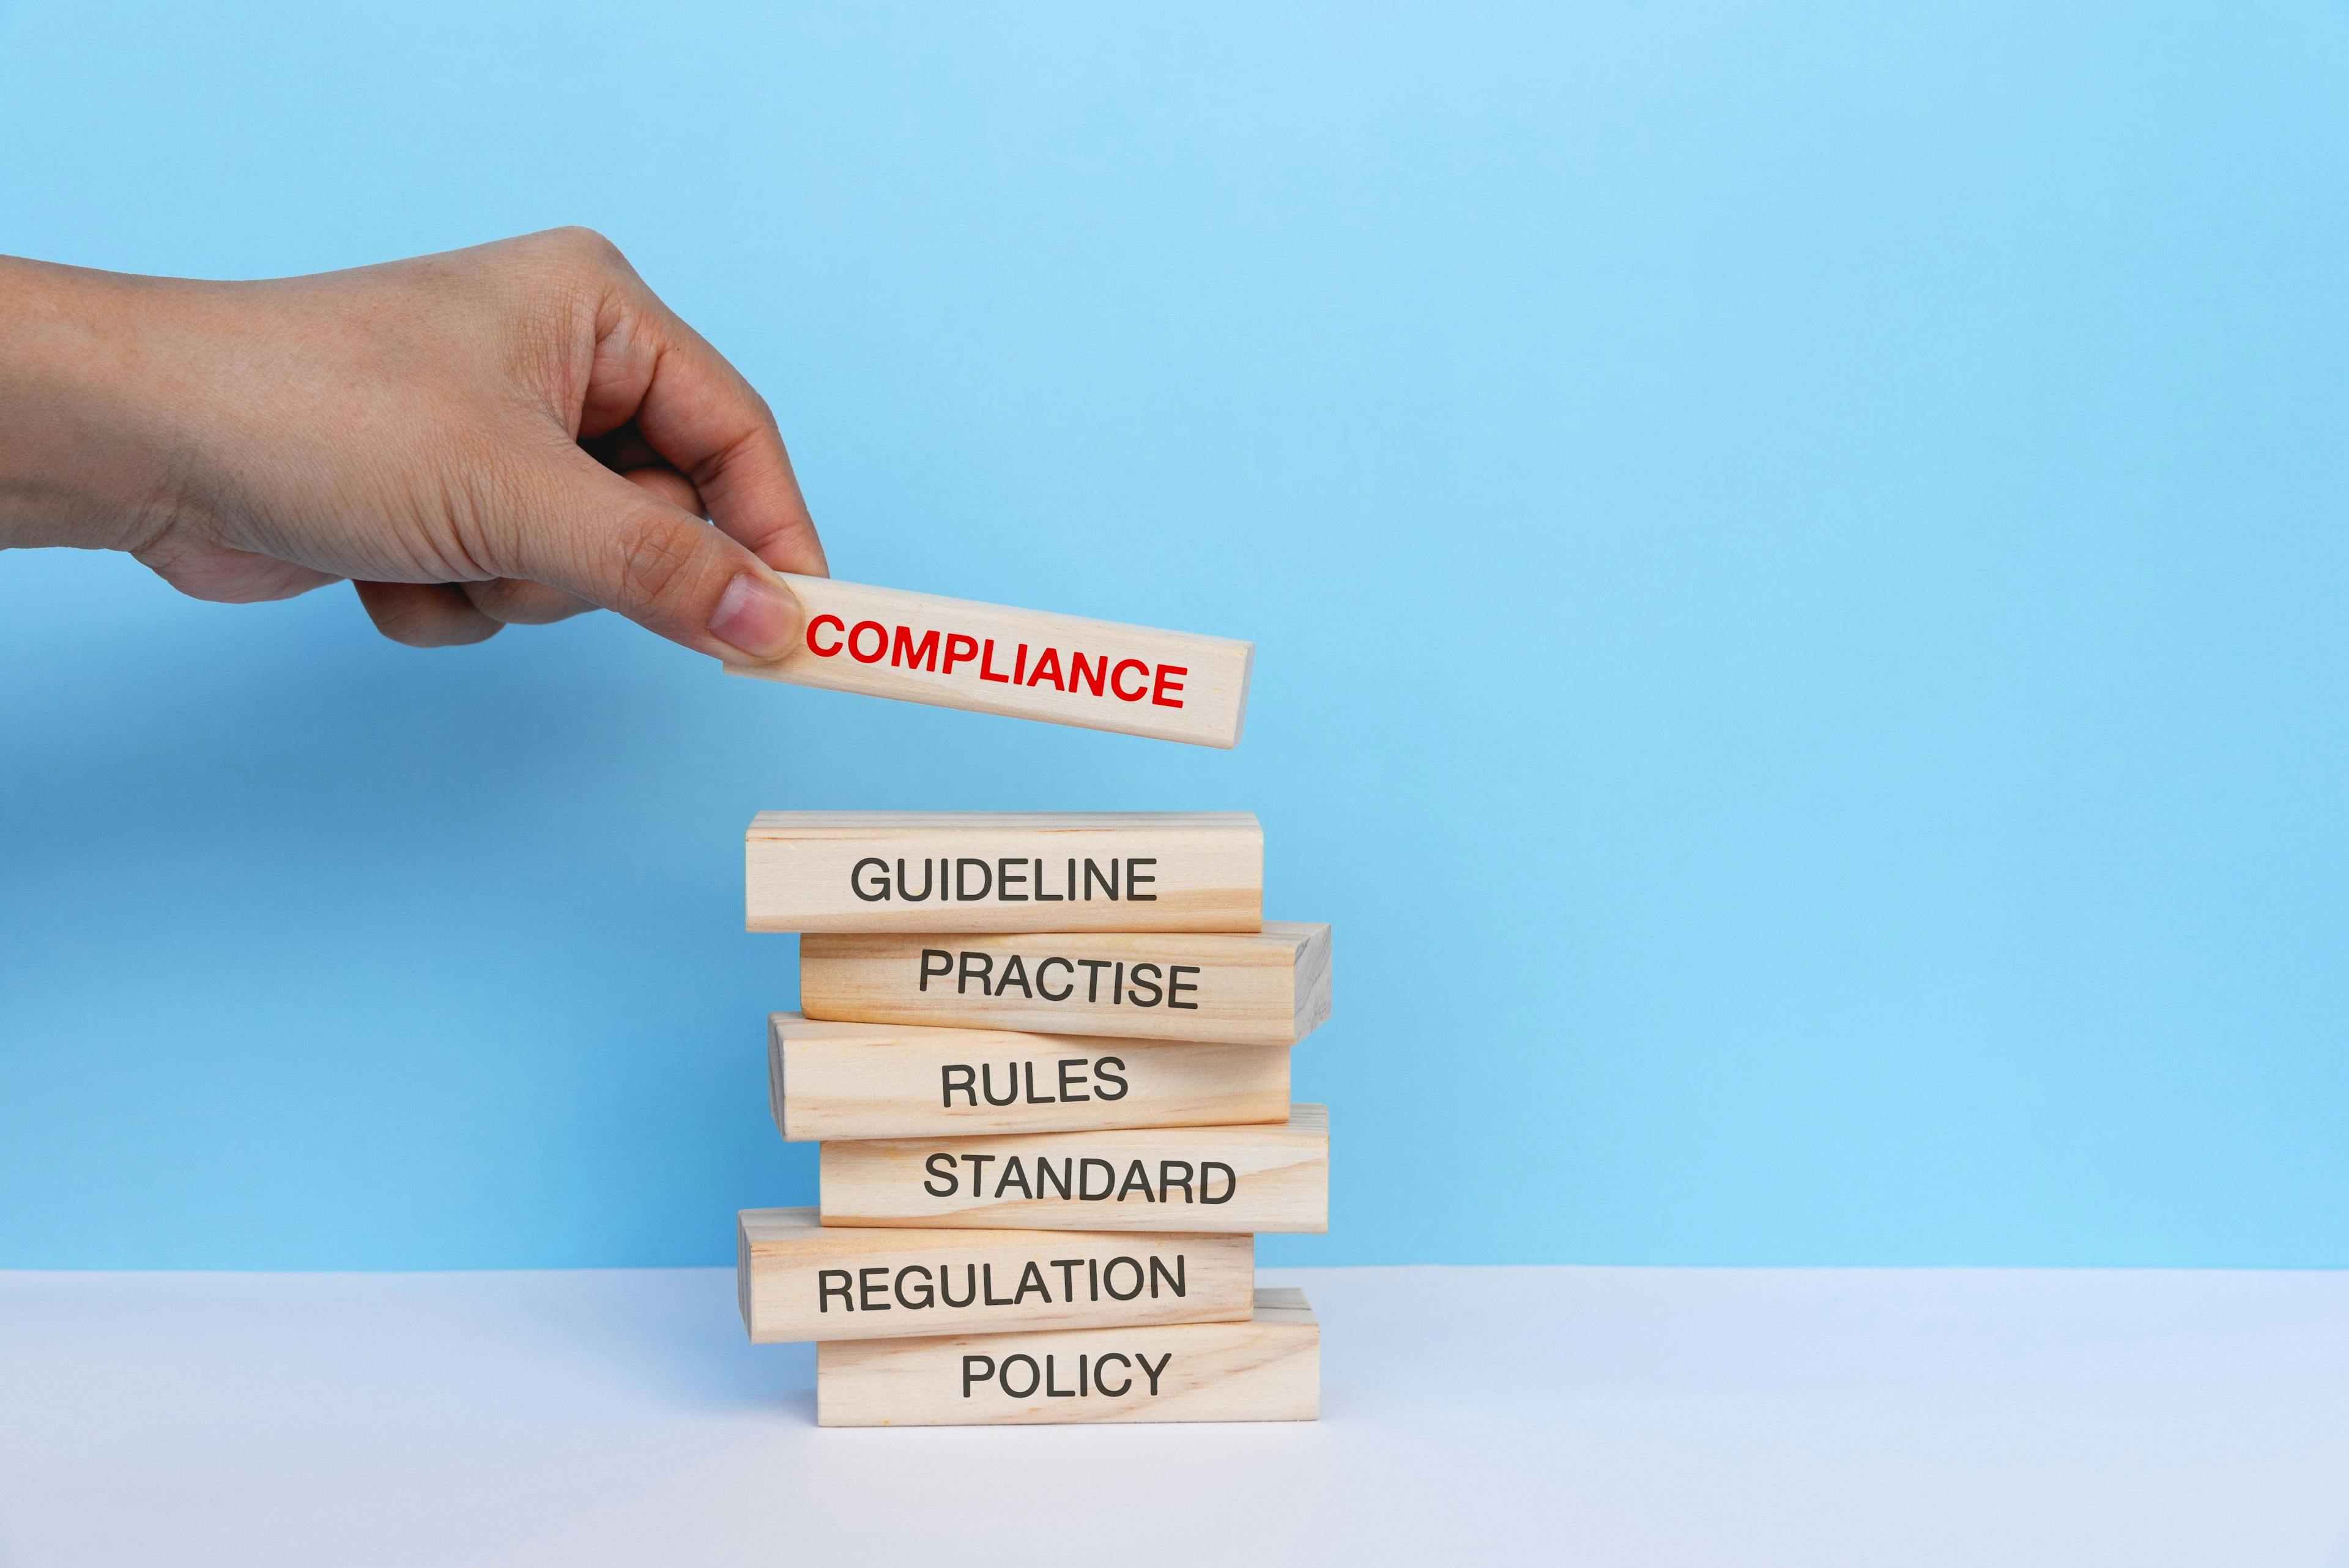 A hand holding out a long building block with "Compliance" text on it stacking it on a stack of blocks with "